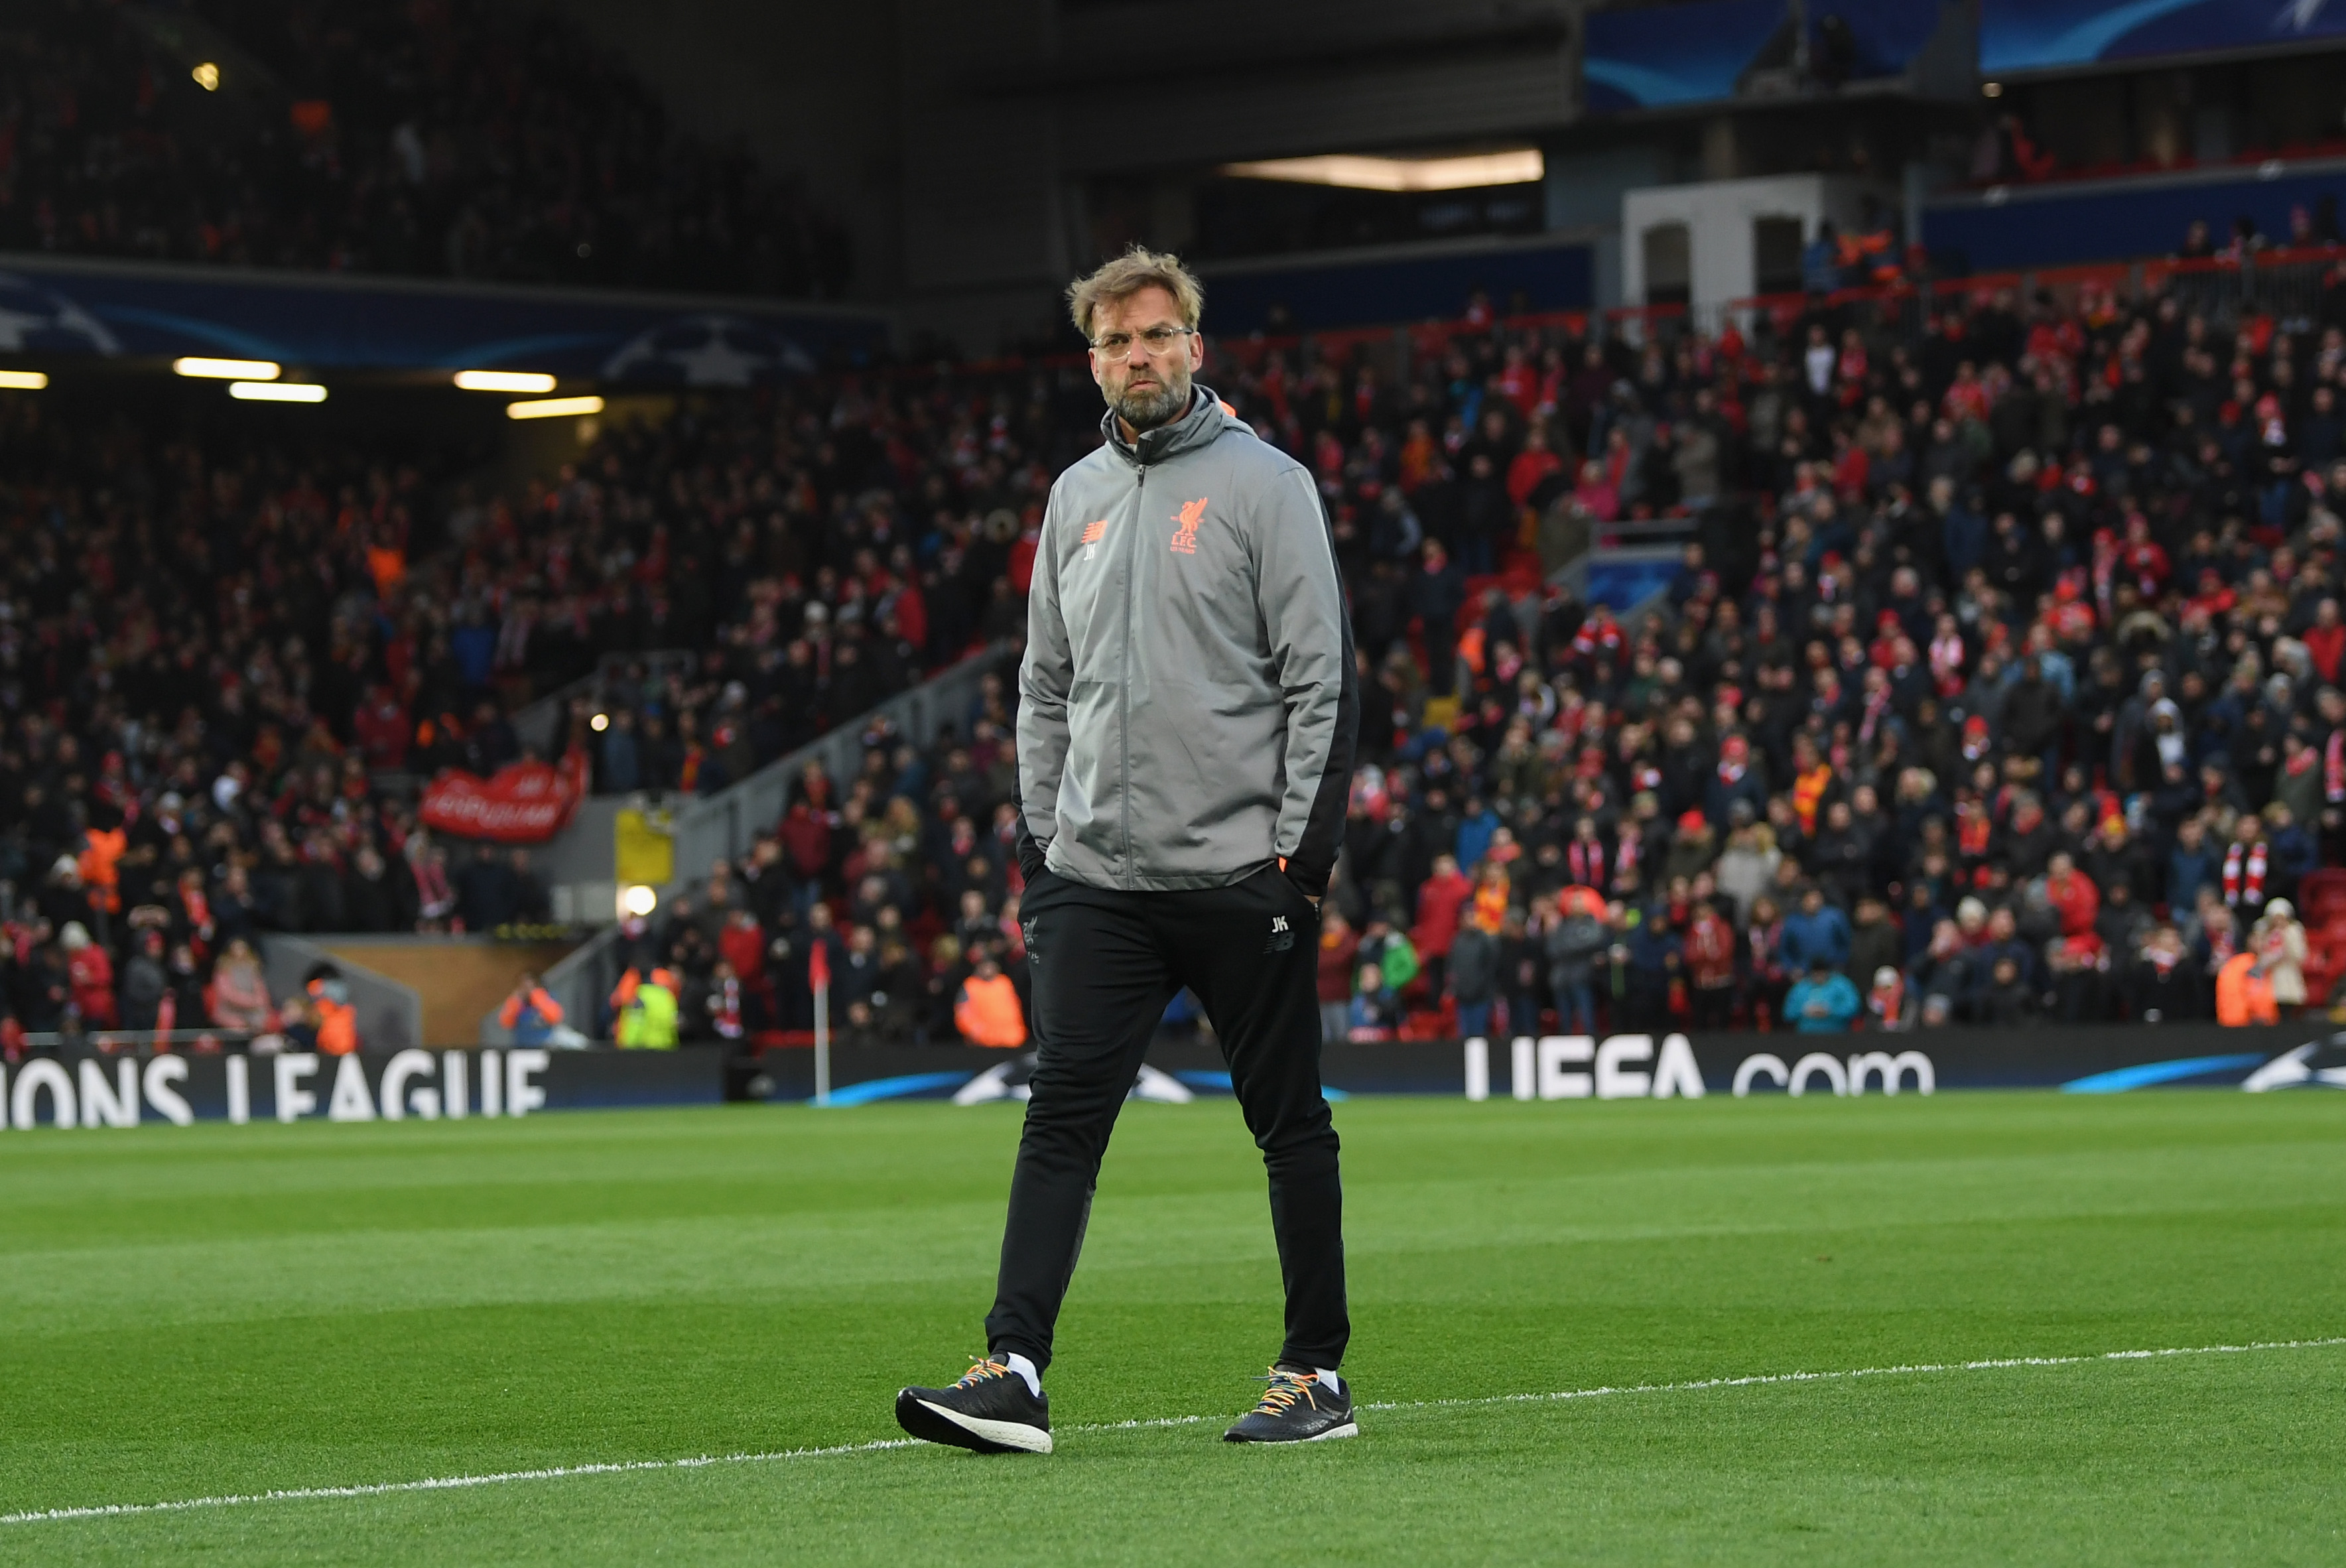 Will Klopp rest a few players after the AS Roma clash? (Photo courtesy - Shaun Botterill/Getty Images)